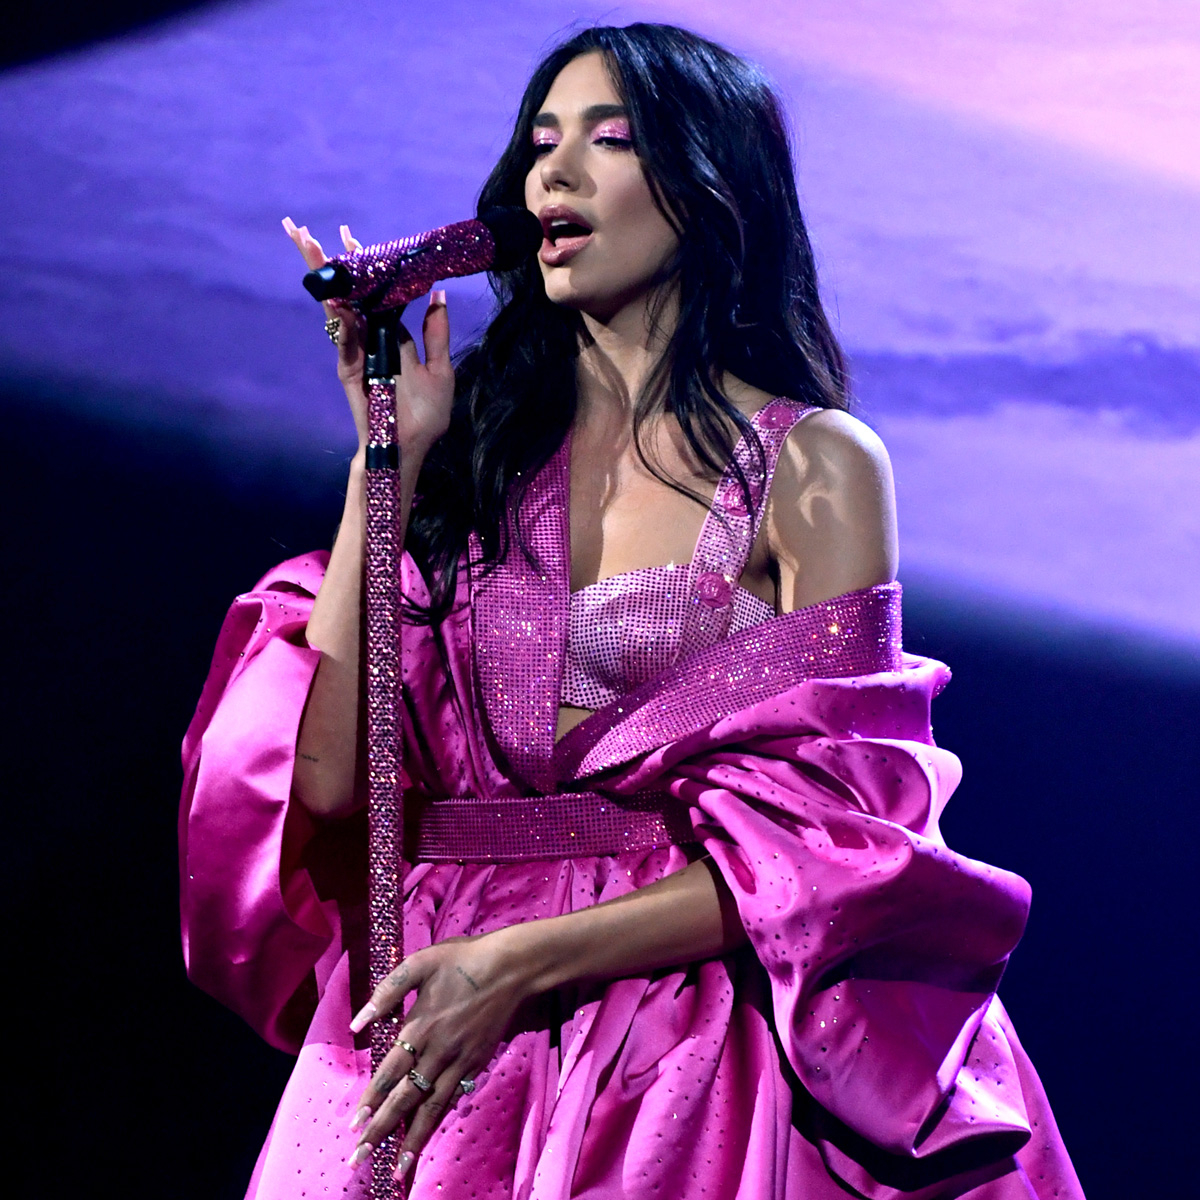 Dua Lipa's Grammys Performance Has Us "Levitating" Out of Our Seats